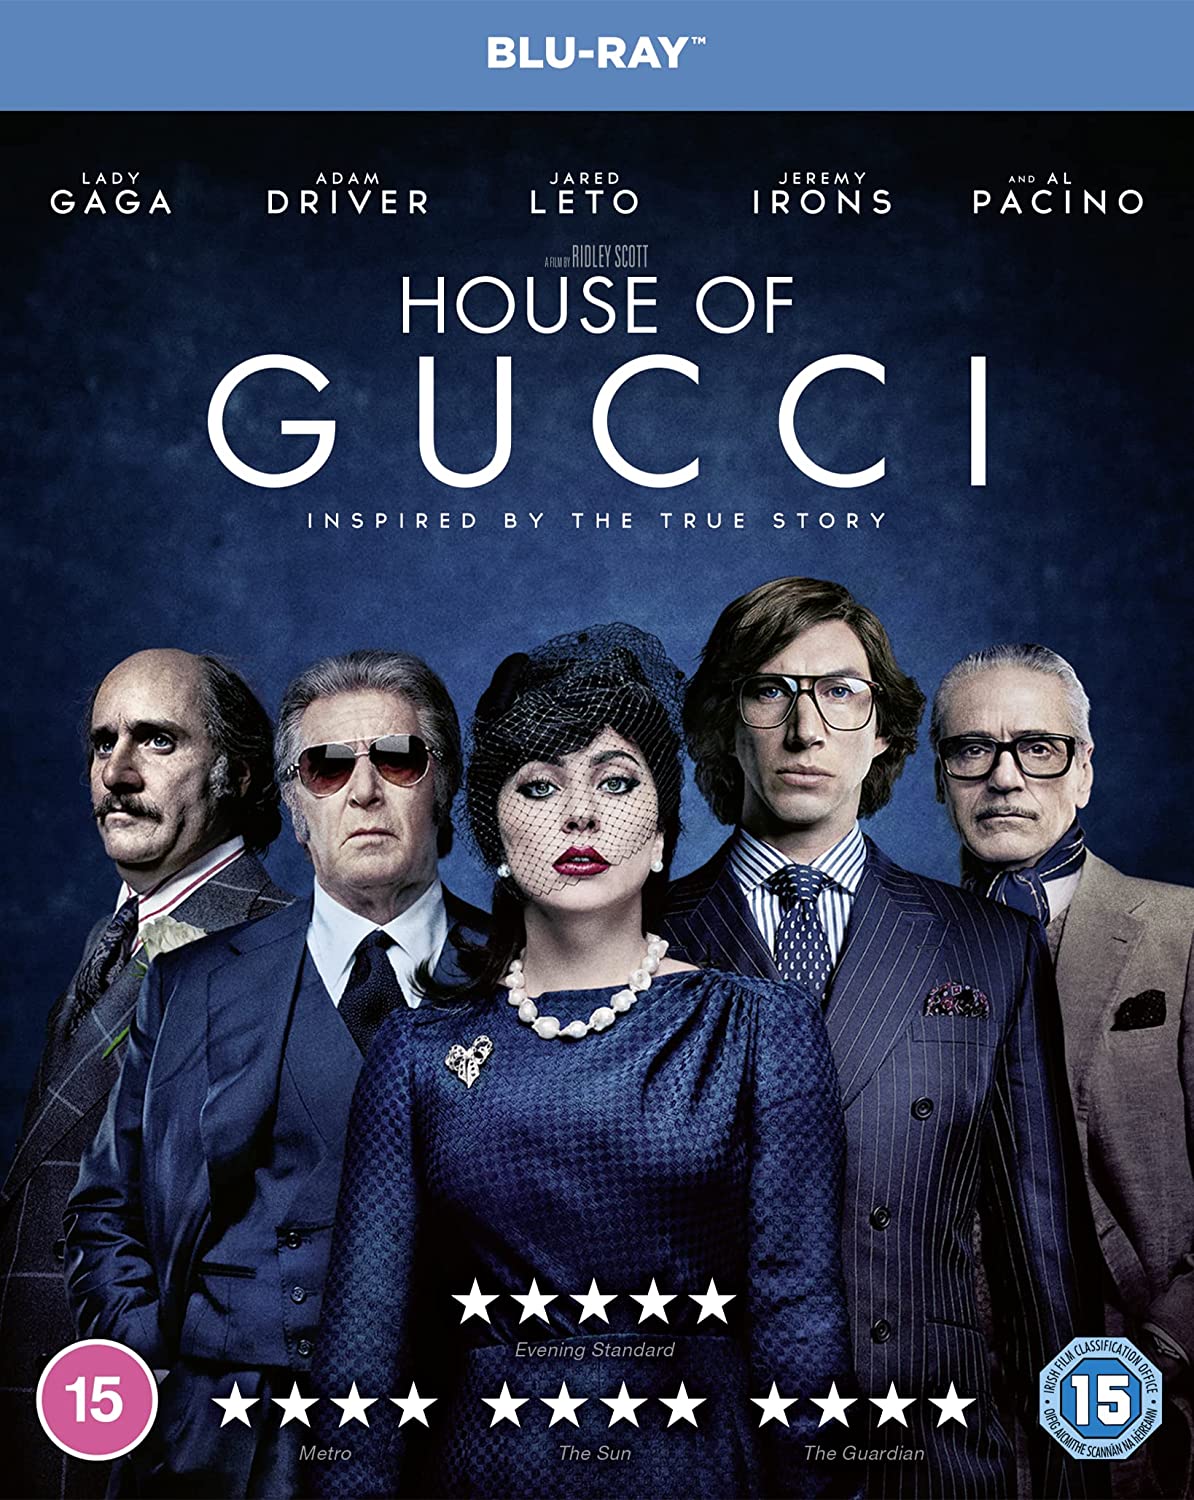 Lady Gaga In House Of Gucci 4K Movie Wallpapers